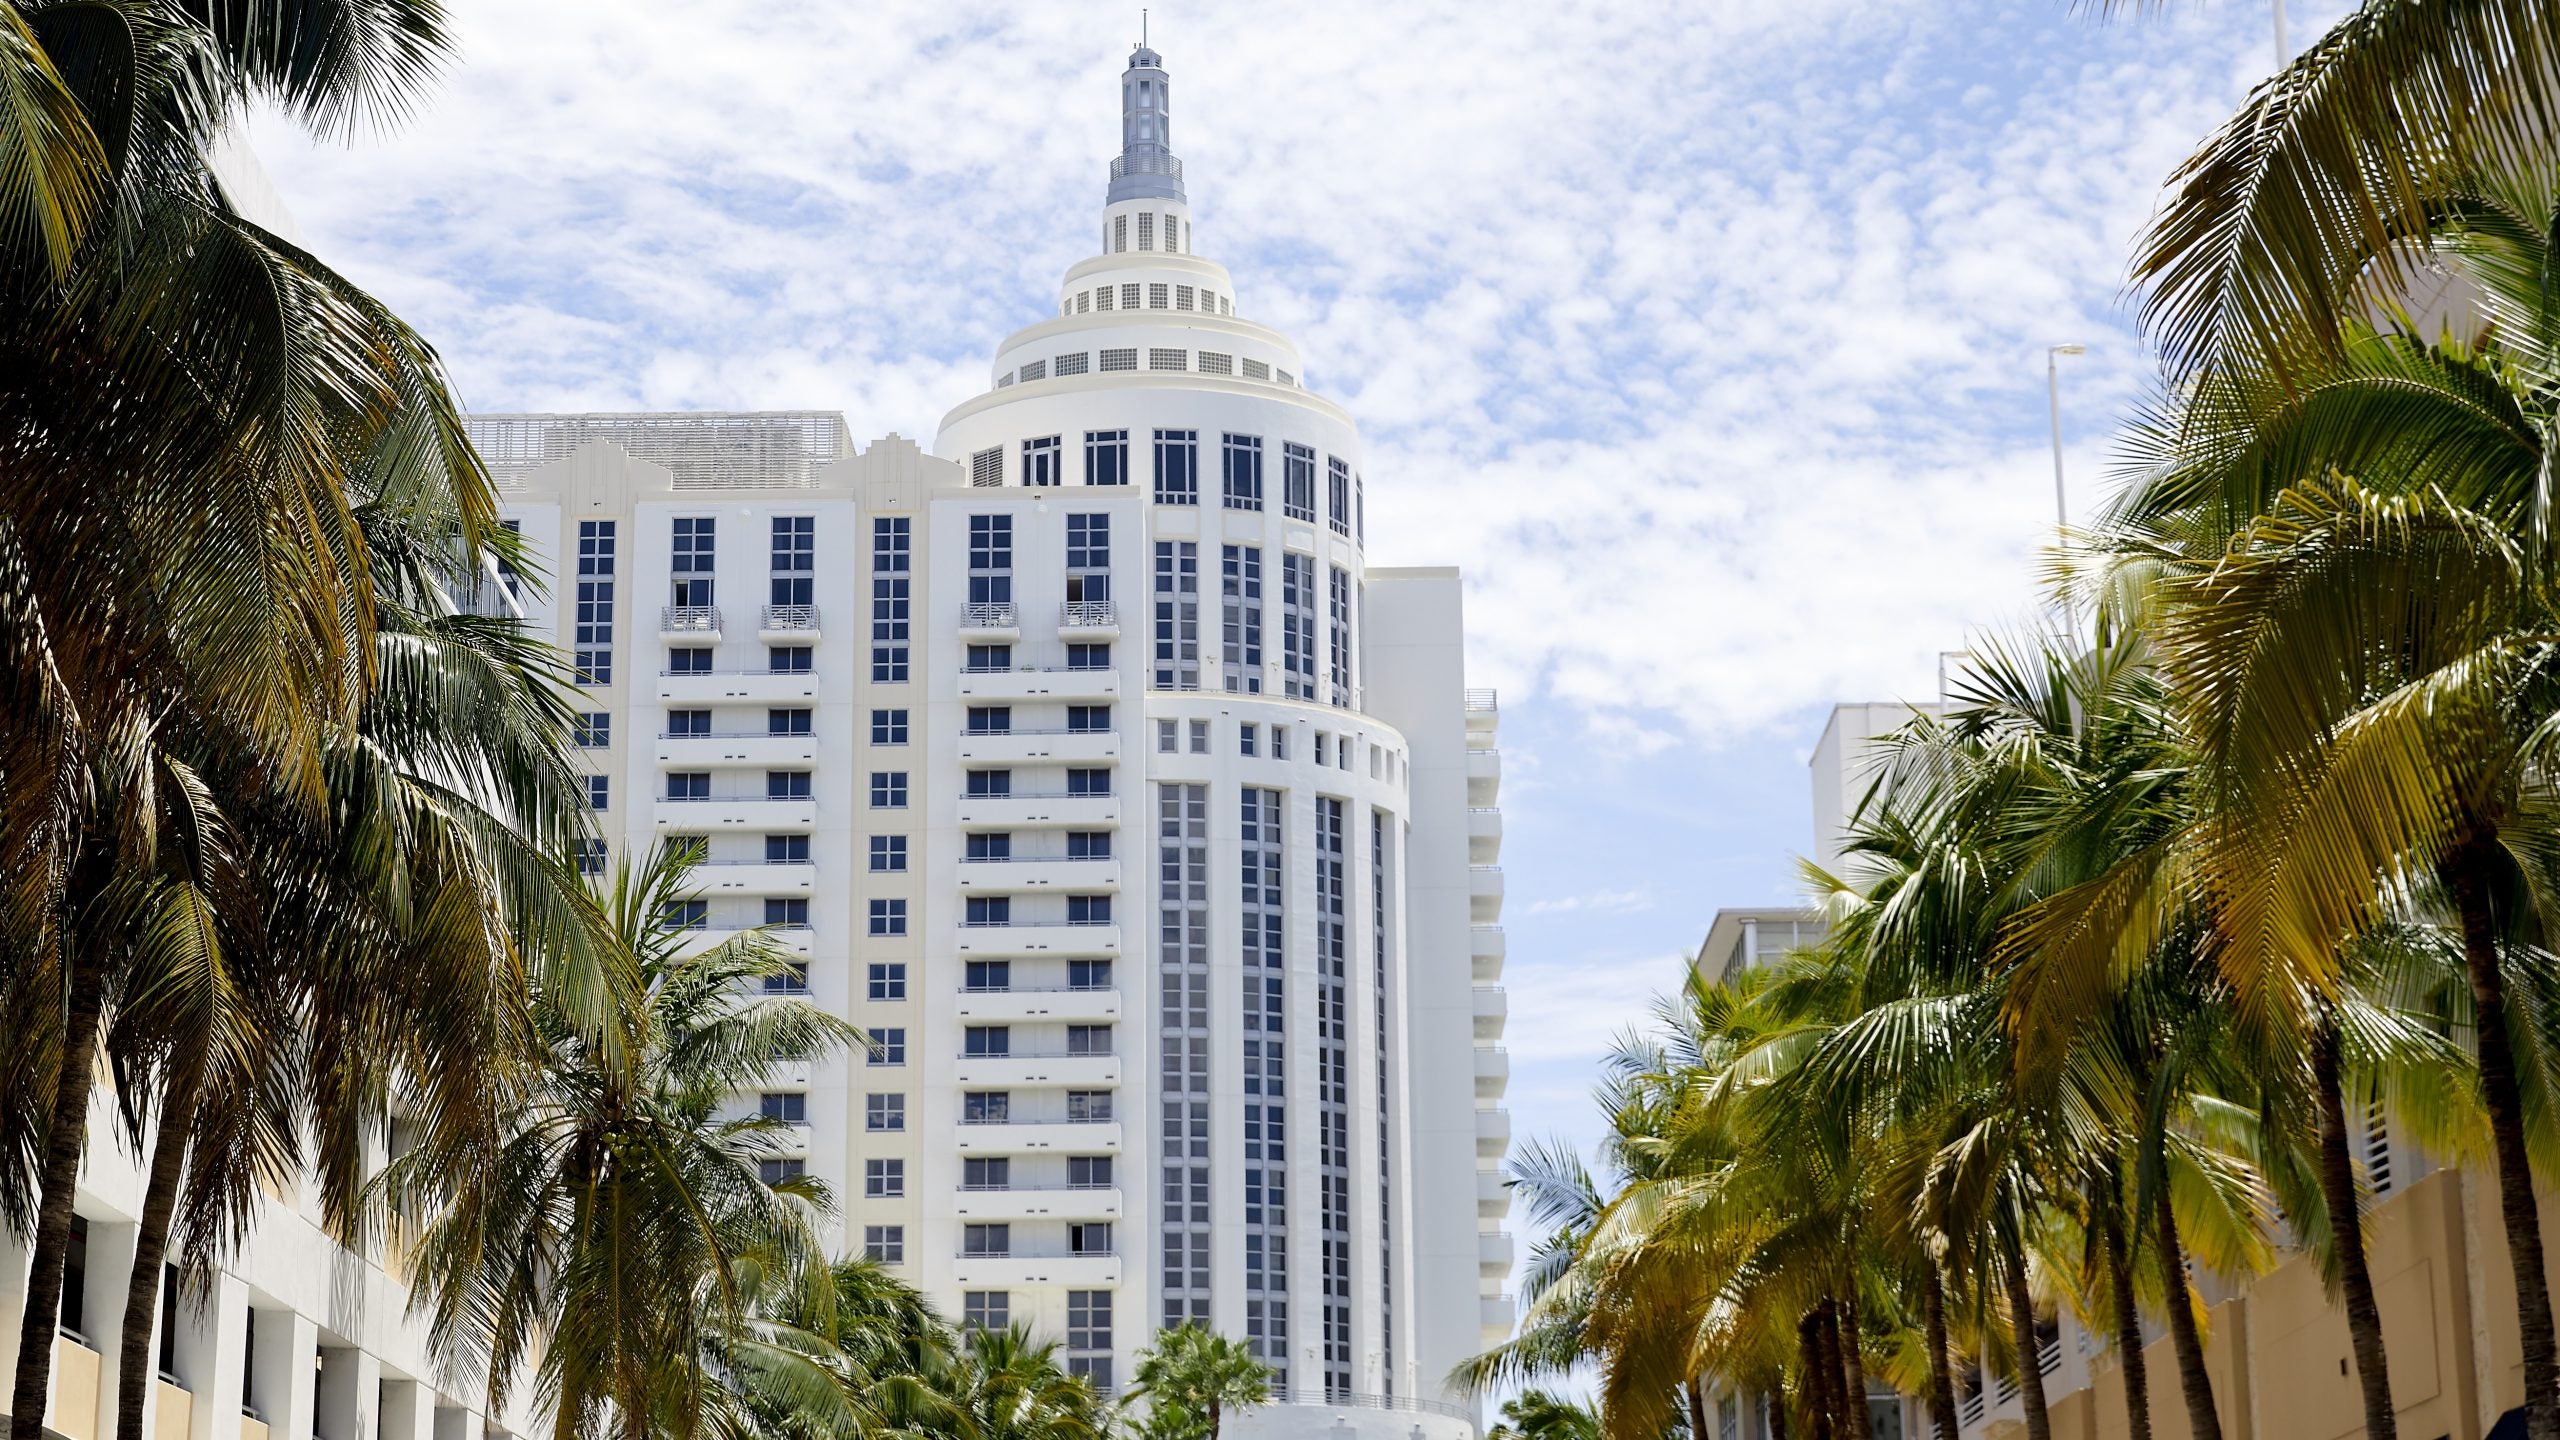 Still A Little Nervous About Traveling? Stay At The Loews Miami And You'll Never Have To Leave